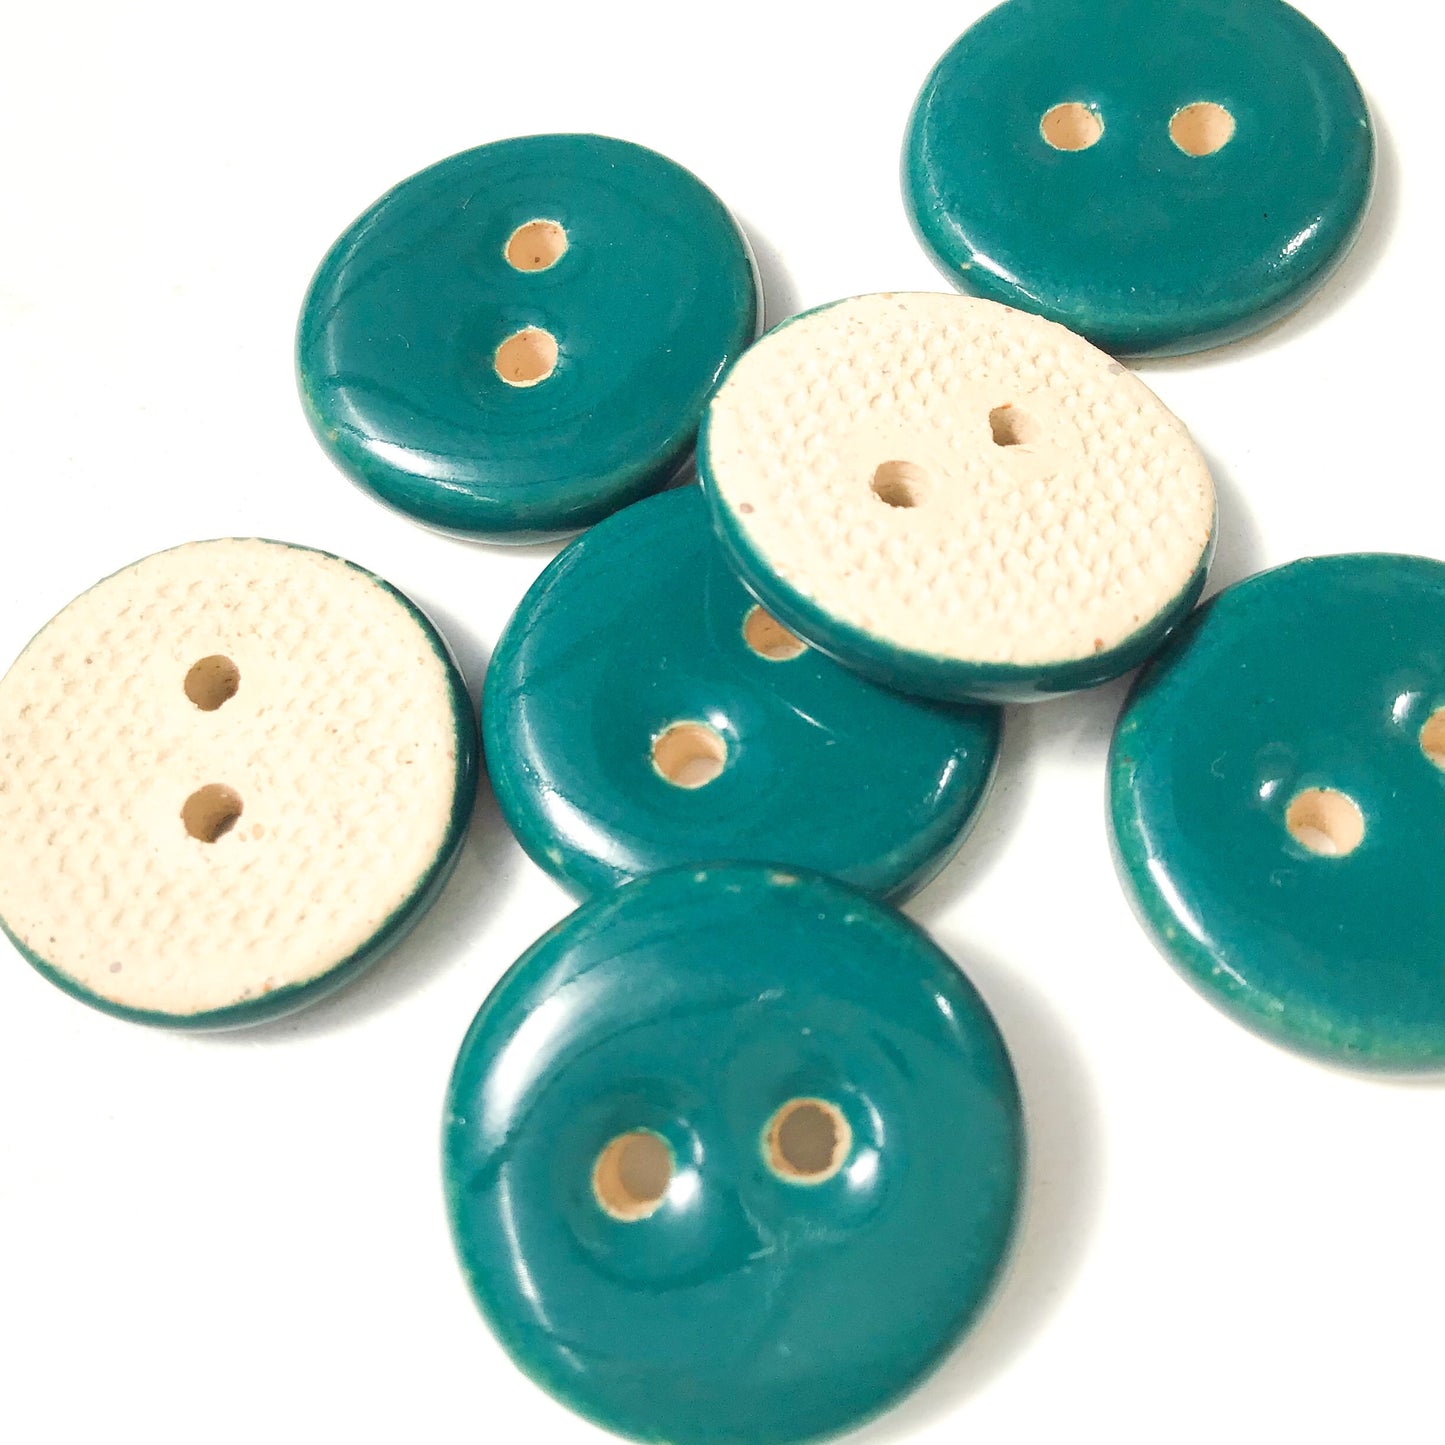 Teal Ceramic Buttons - Teal Clay Buttons - 3/4" - 7 Pack